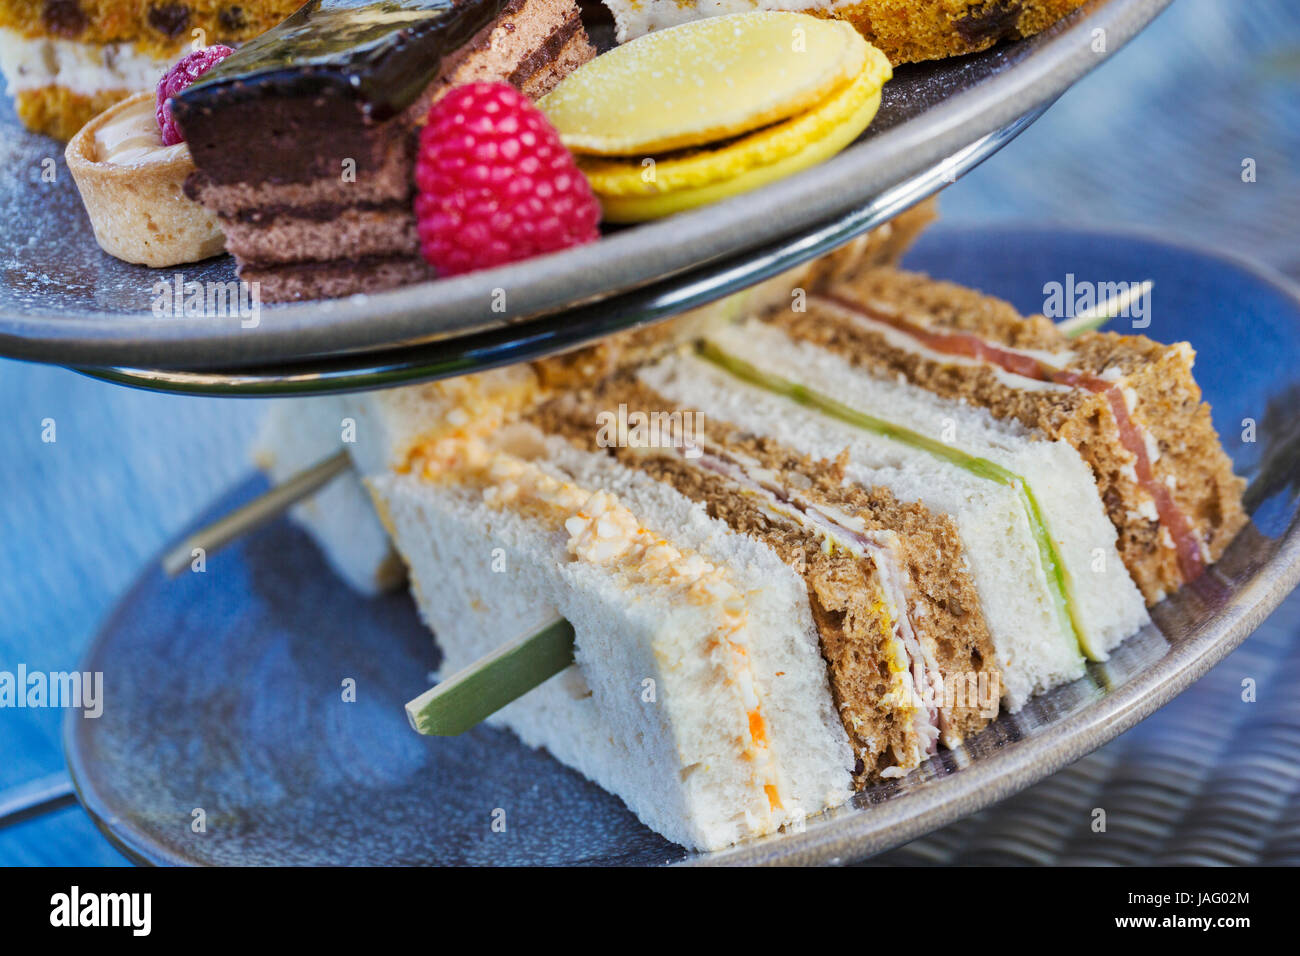 Close up of a selection of sandwiches and cakes, traditional afternoon tea. Stock Photo